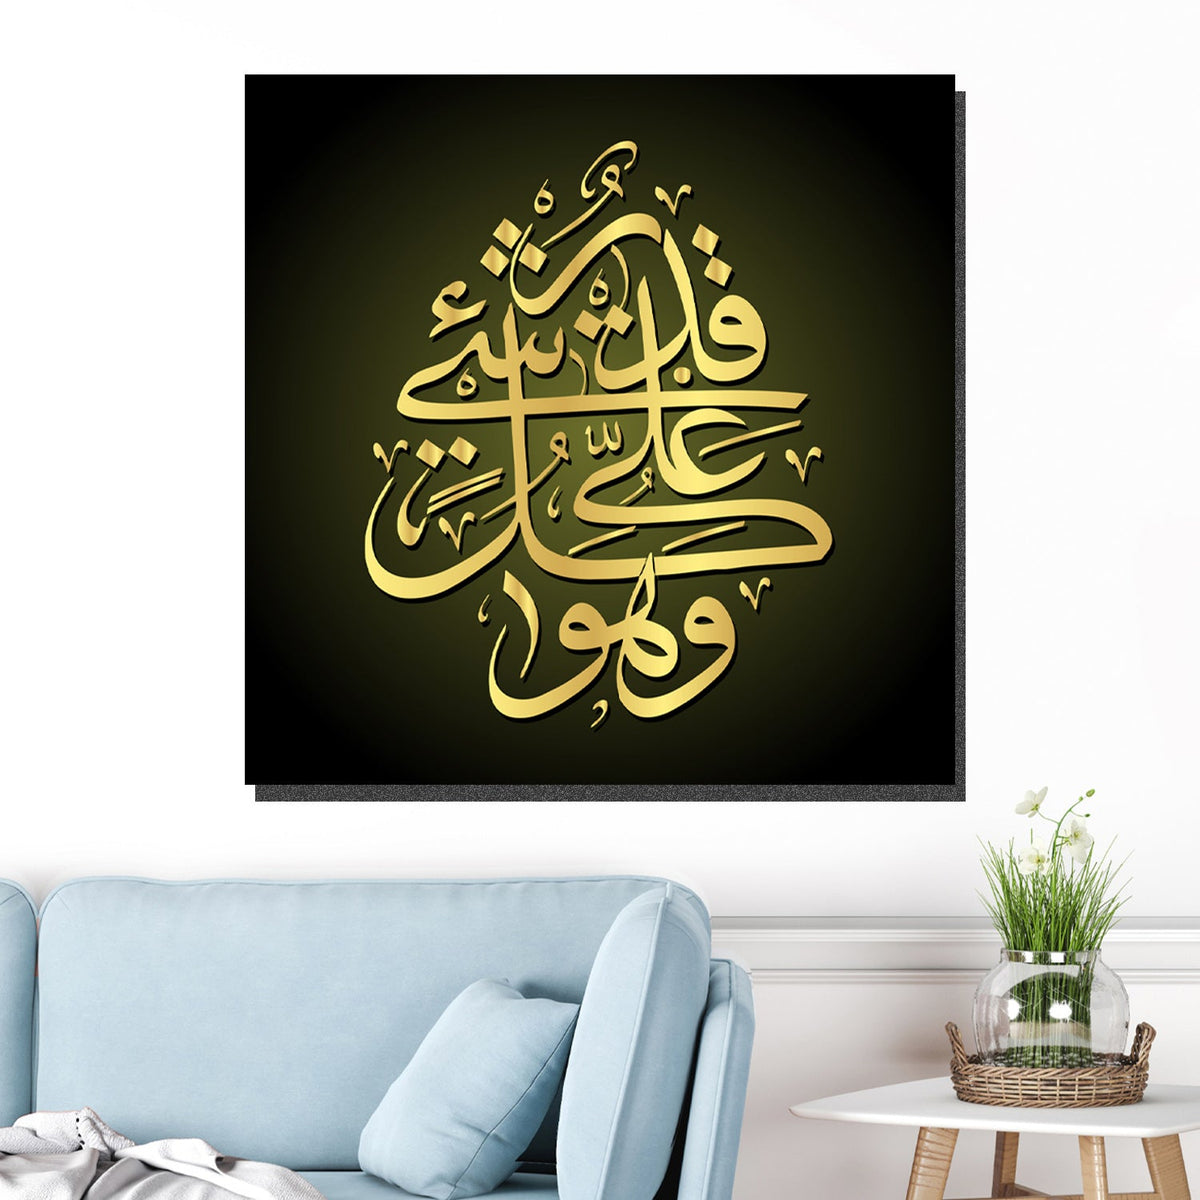 https://cdn.shopify.com/s/files/1/0387/9986/8044/products/IslamicArtLimitedEdition17CanvasArtprintStretched-4.jpg